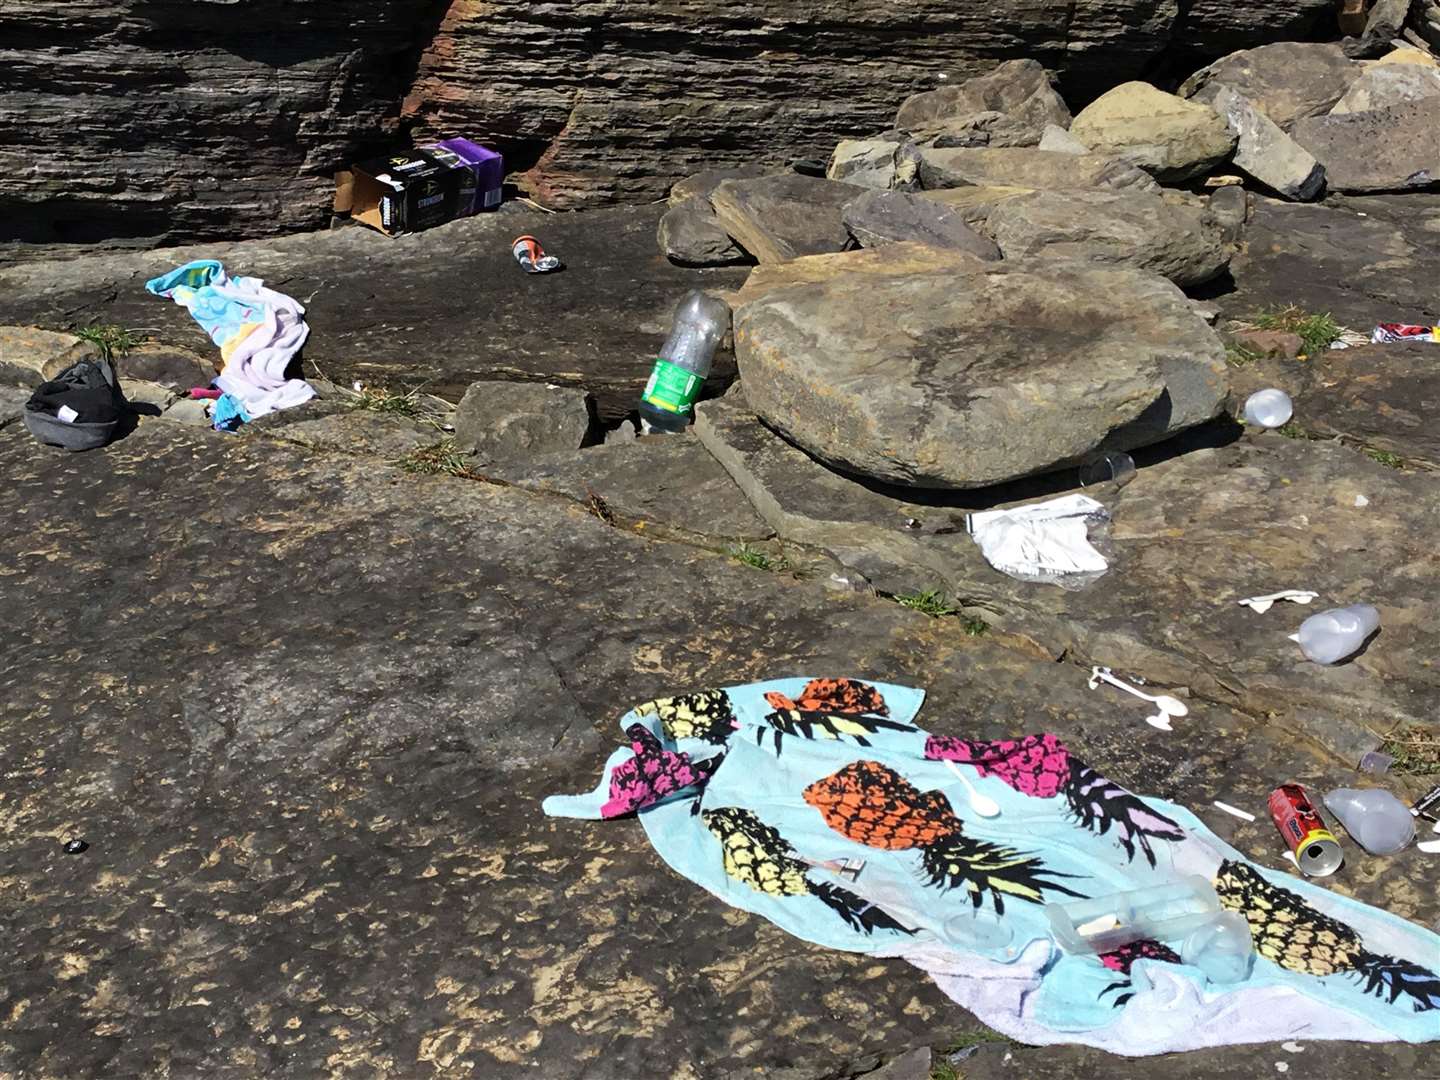 This beach towel was among the many items tidied up by Mary and Alister Richard on Sunday. They filled three bin bags with rubbish left behind after what had evidently been a drink-fuelled gathering.